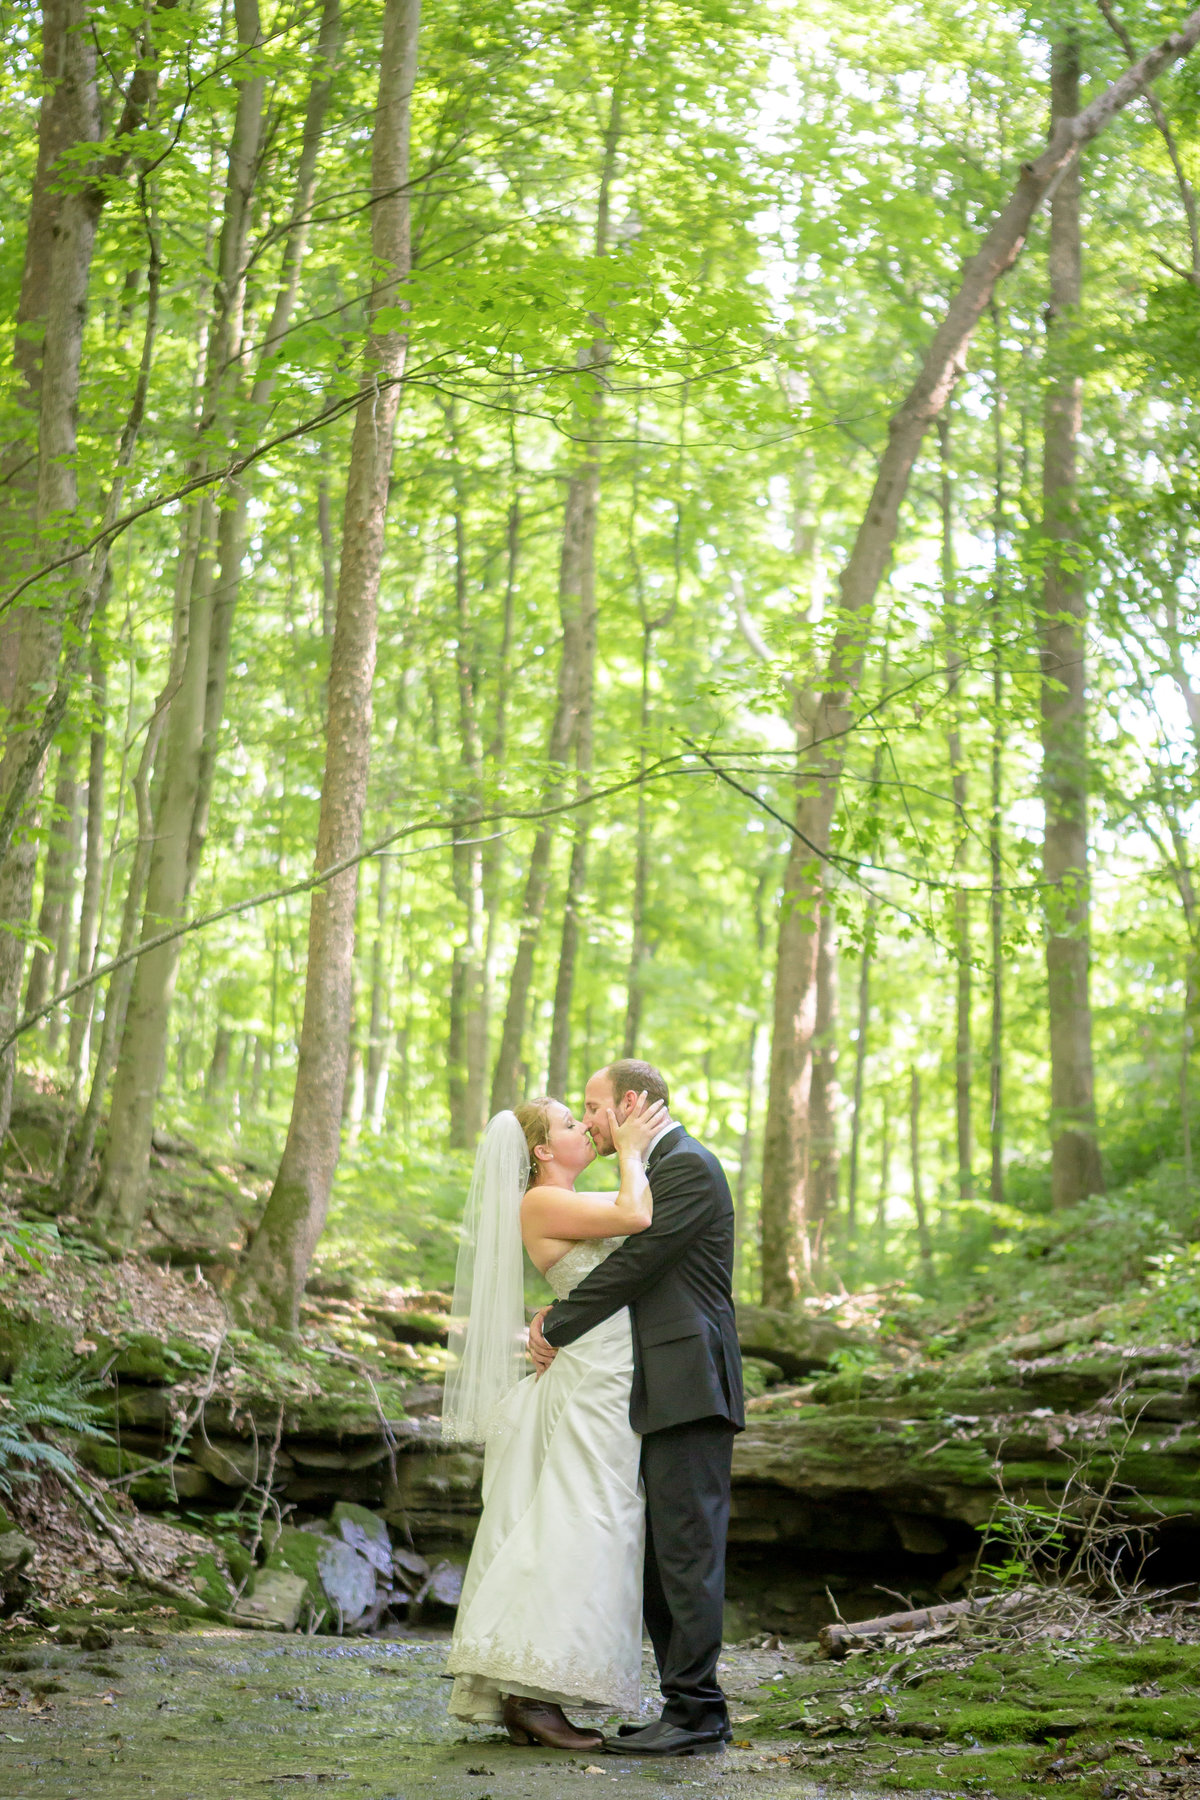 Brandt-Anna-Southern-Indiana-Barn-Wedding-Waterfall-woods-forest-rural-stream-trees-diy-photography-1a